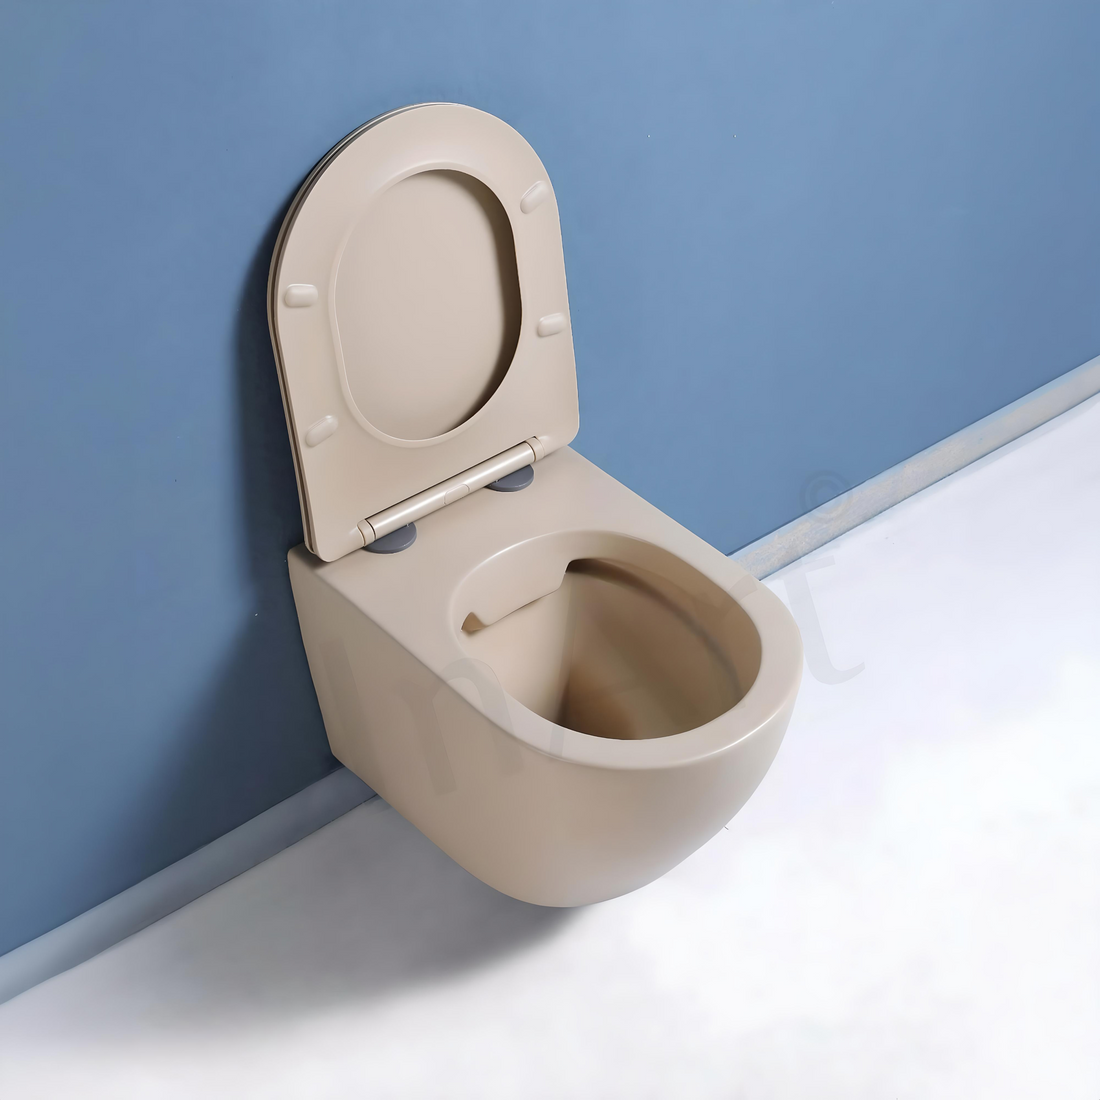 InArt Wall Mounted Ceramic Toilet - Oval Beige Commode with Soft Close Duroplast Seat, Easy Clean, Sleek Design for Bathrooms - InArt-Studio